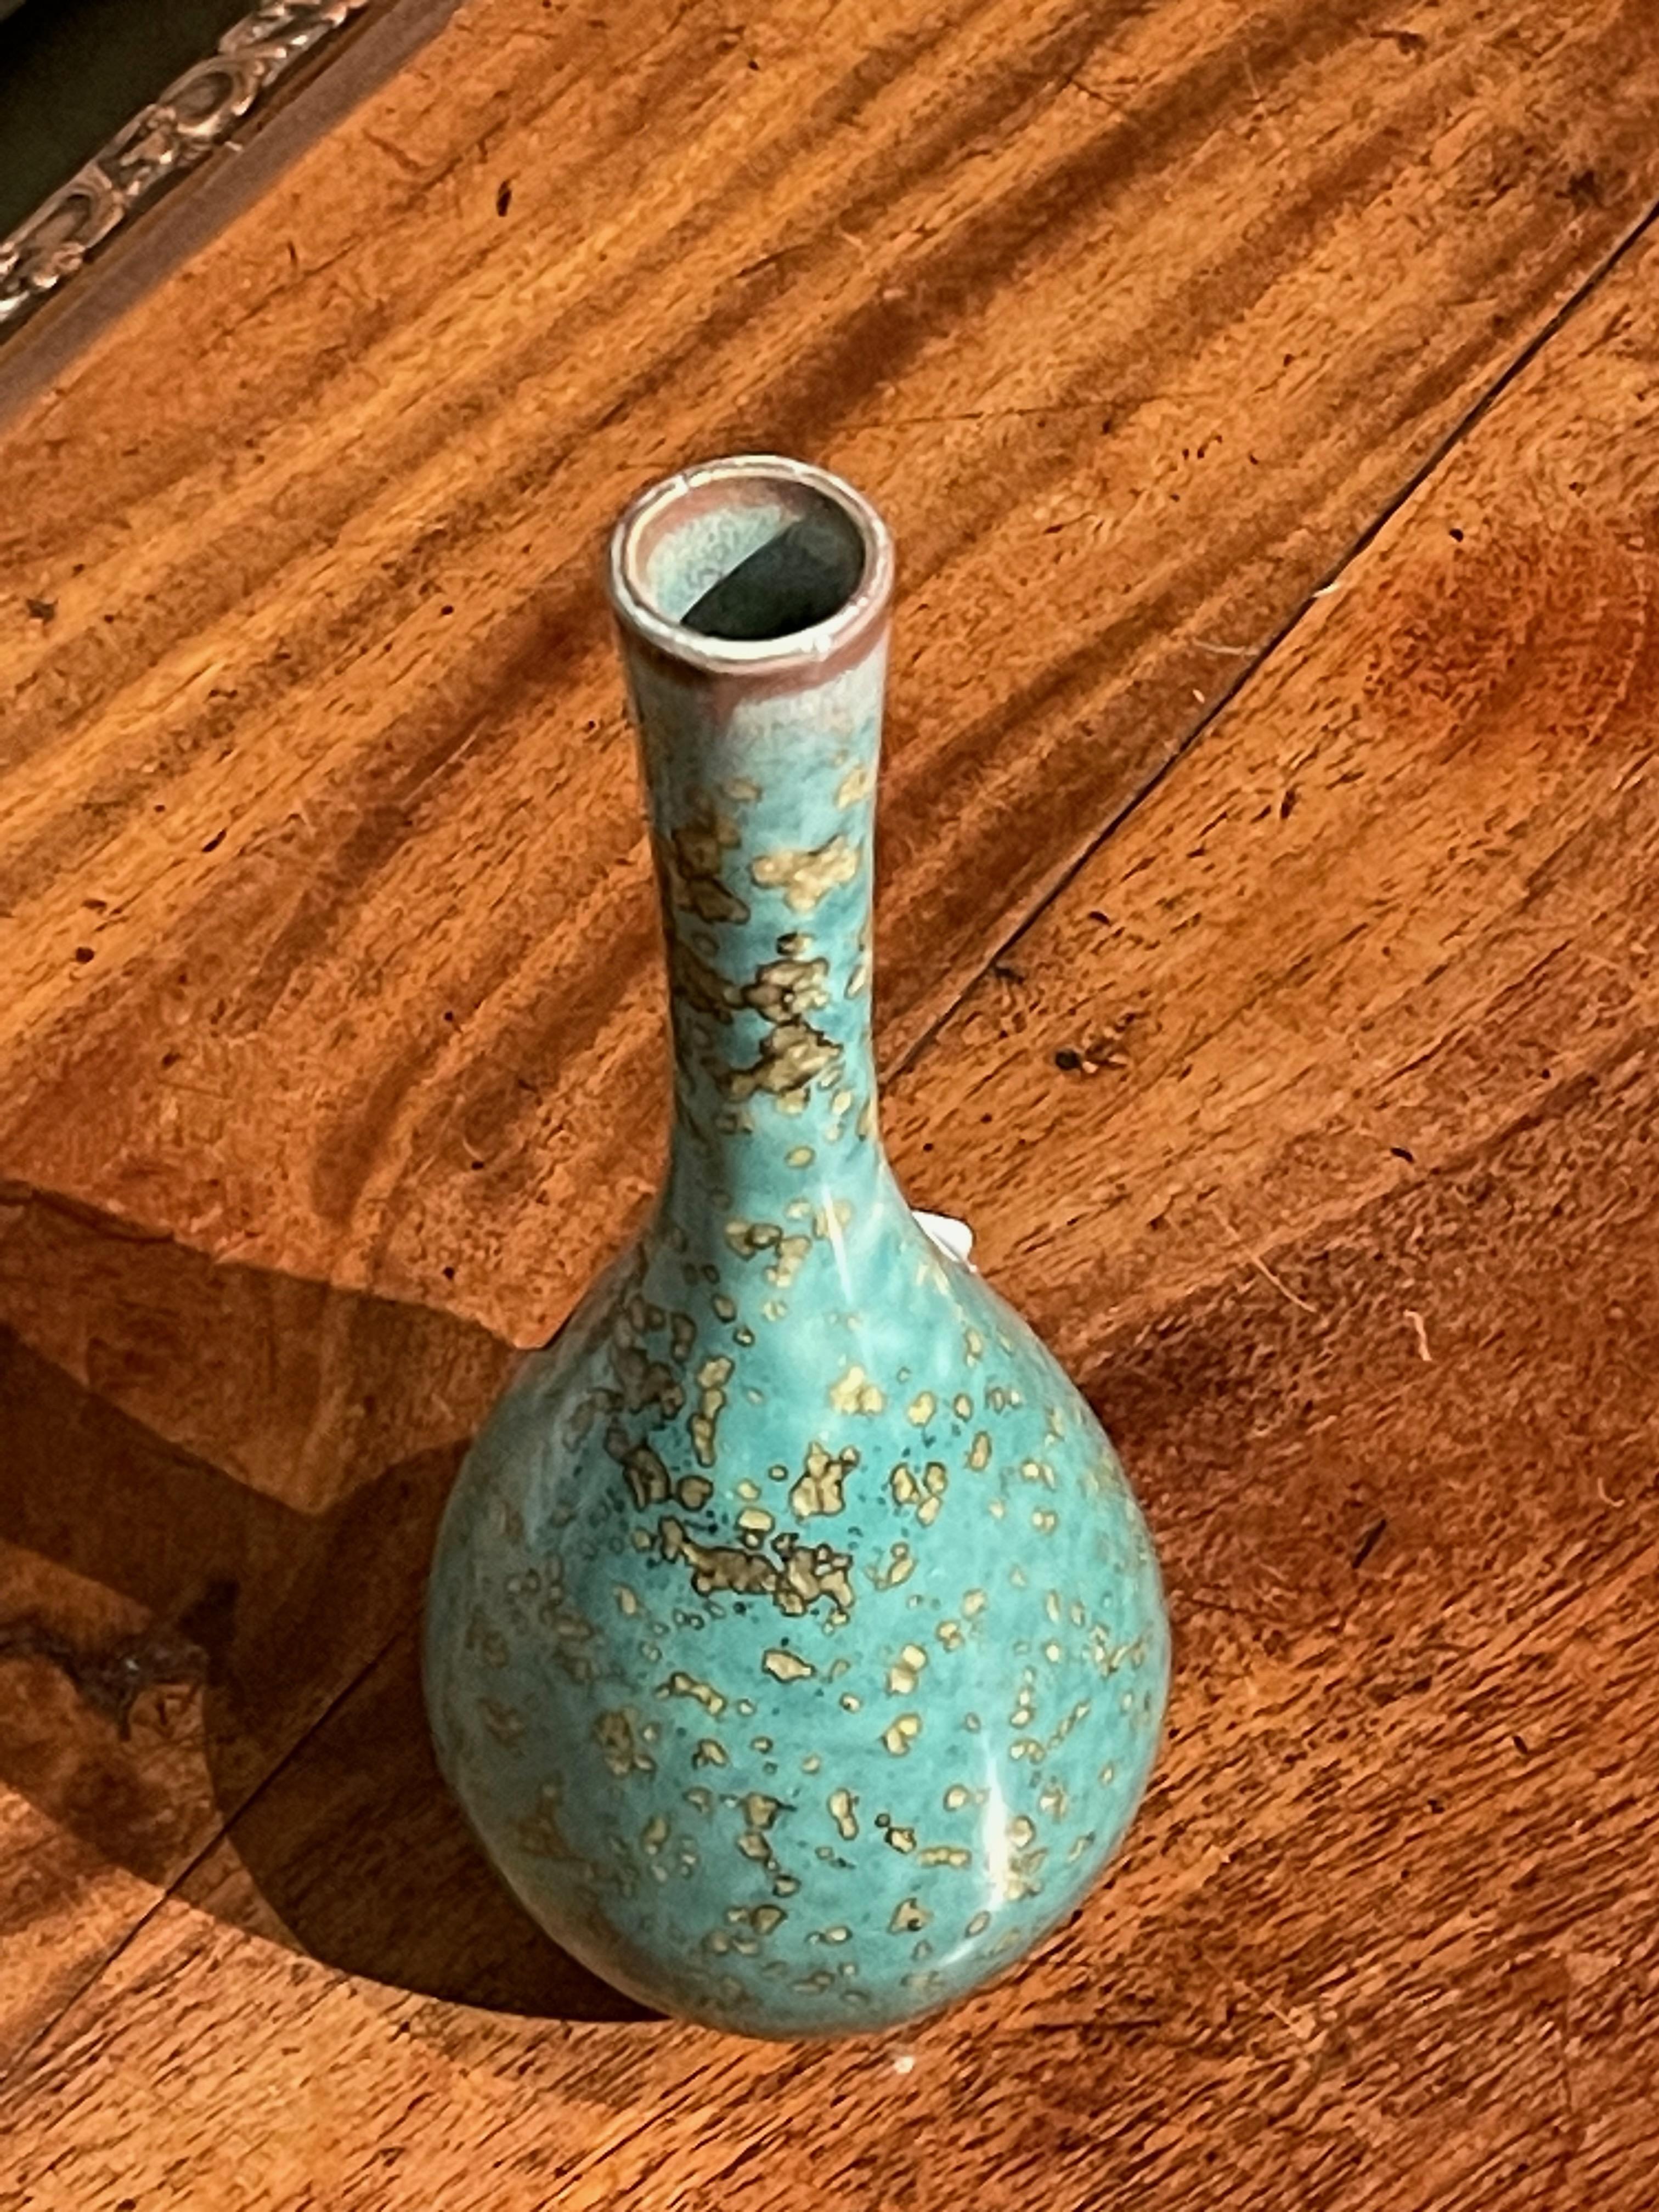 Contemporary Chinese turquoise with gold speckled glaze vase.
Thin with small spout.
One of several pieces from a large collection.